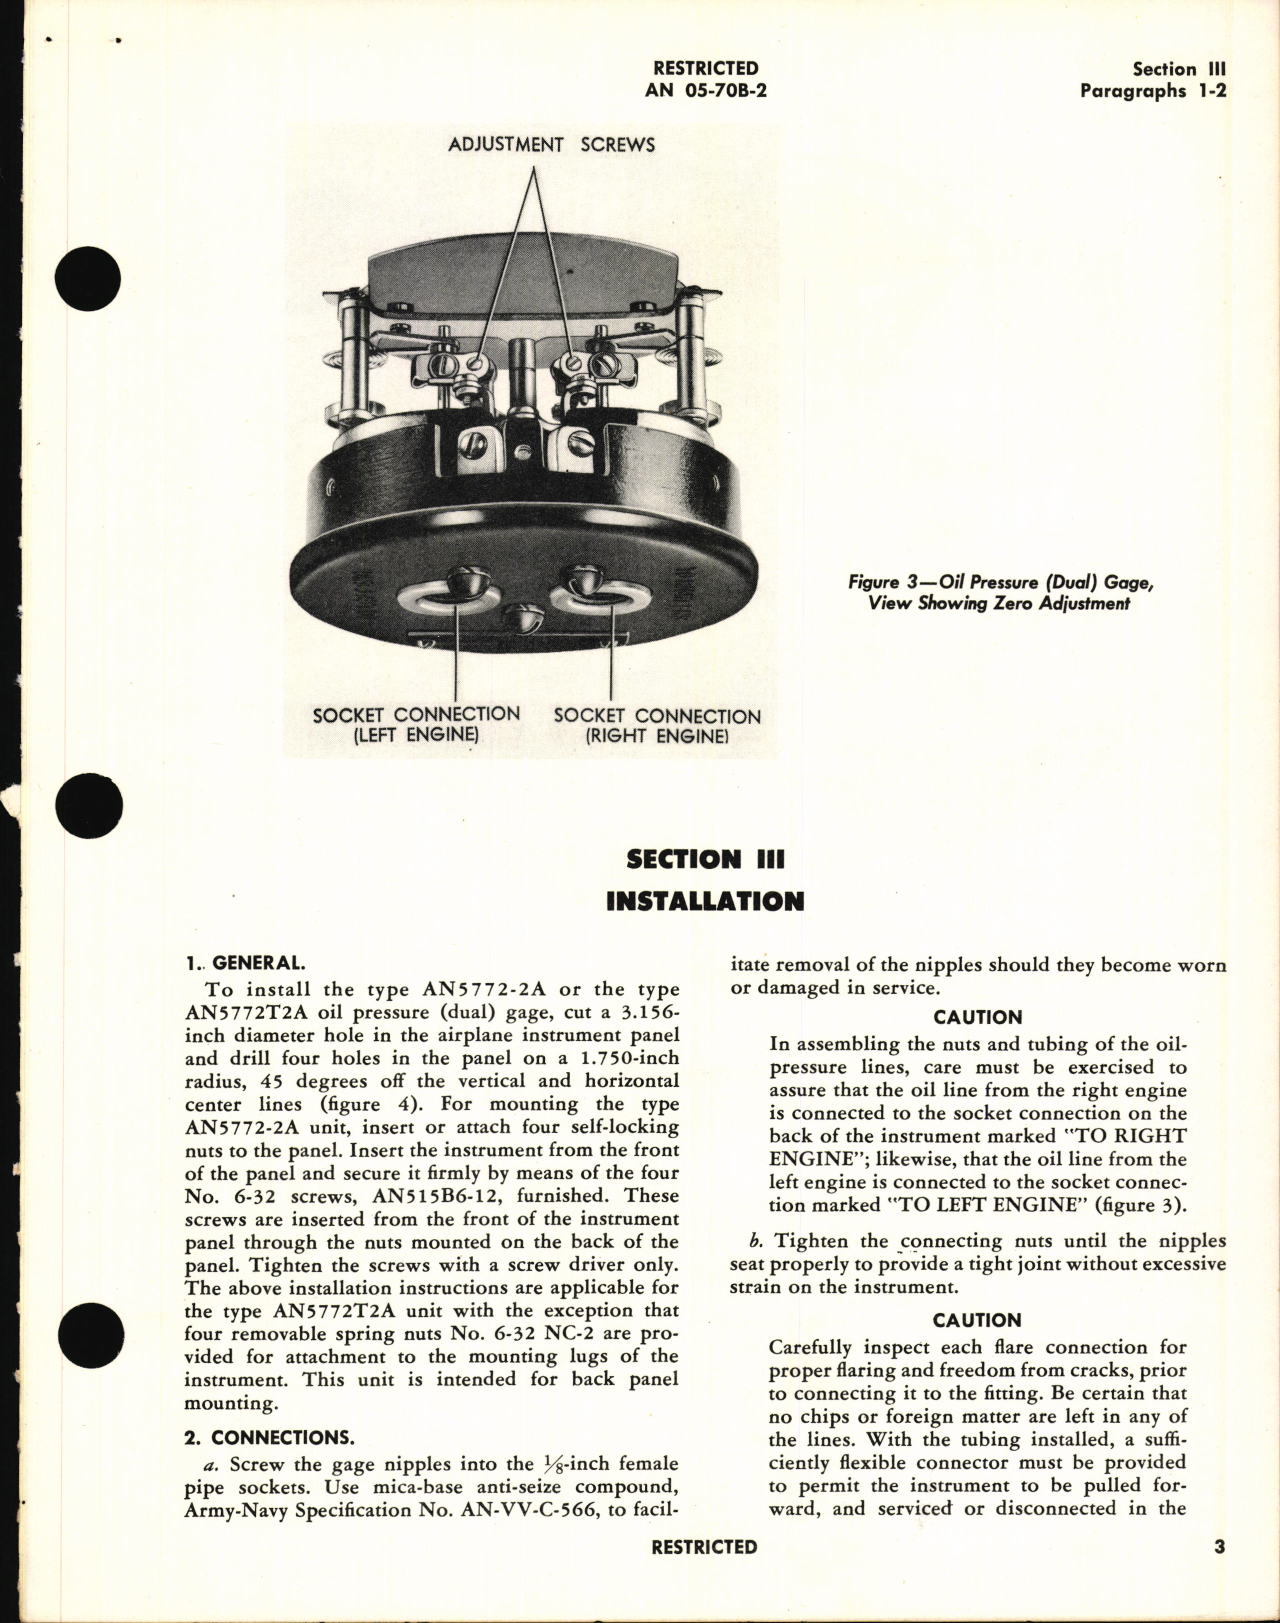 Sample page 7 from AirCorps Library document: Operation, Service, & Overhaul Instructions with Parts Catalog for Dual Oil Pressure Gages